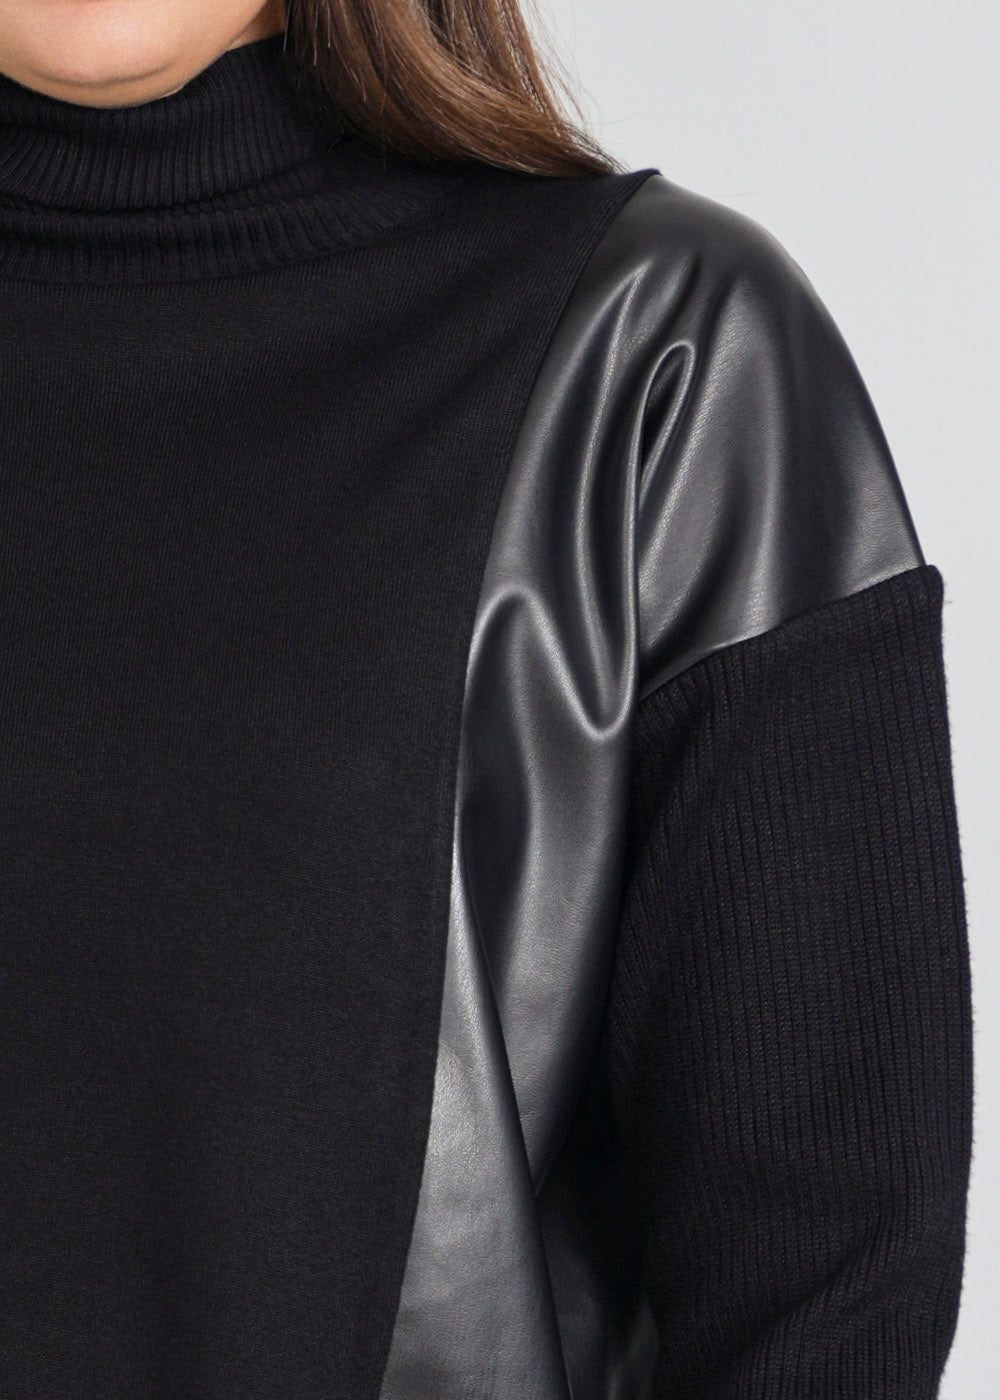 Black Sweater with Side Leather Flair